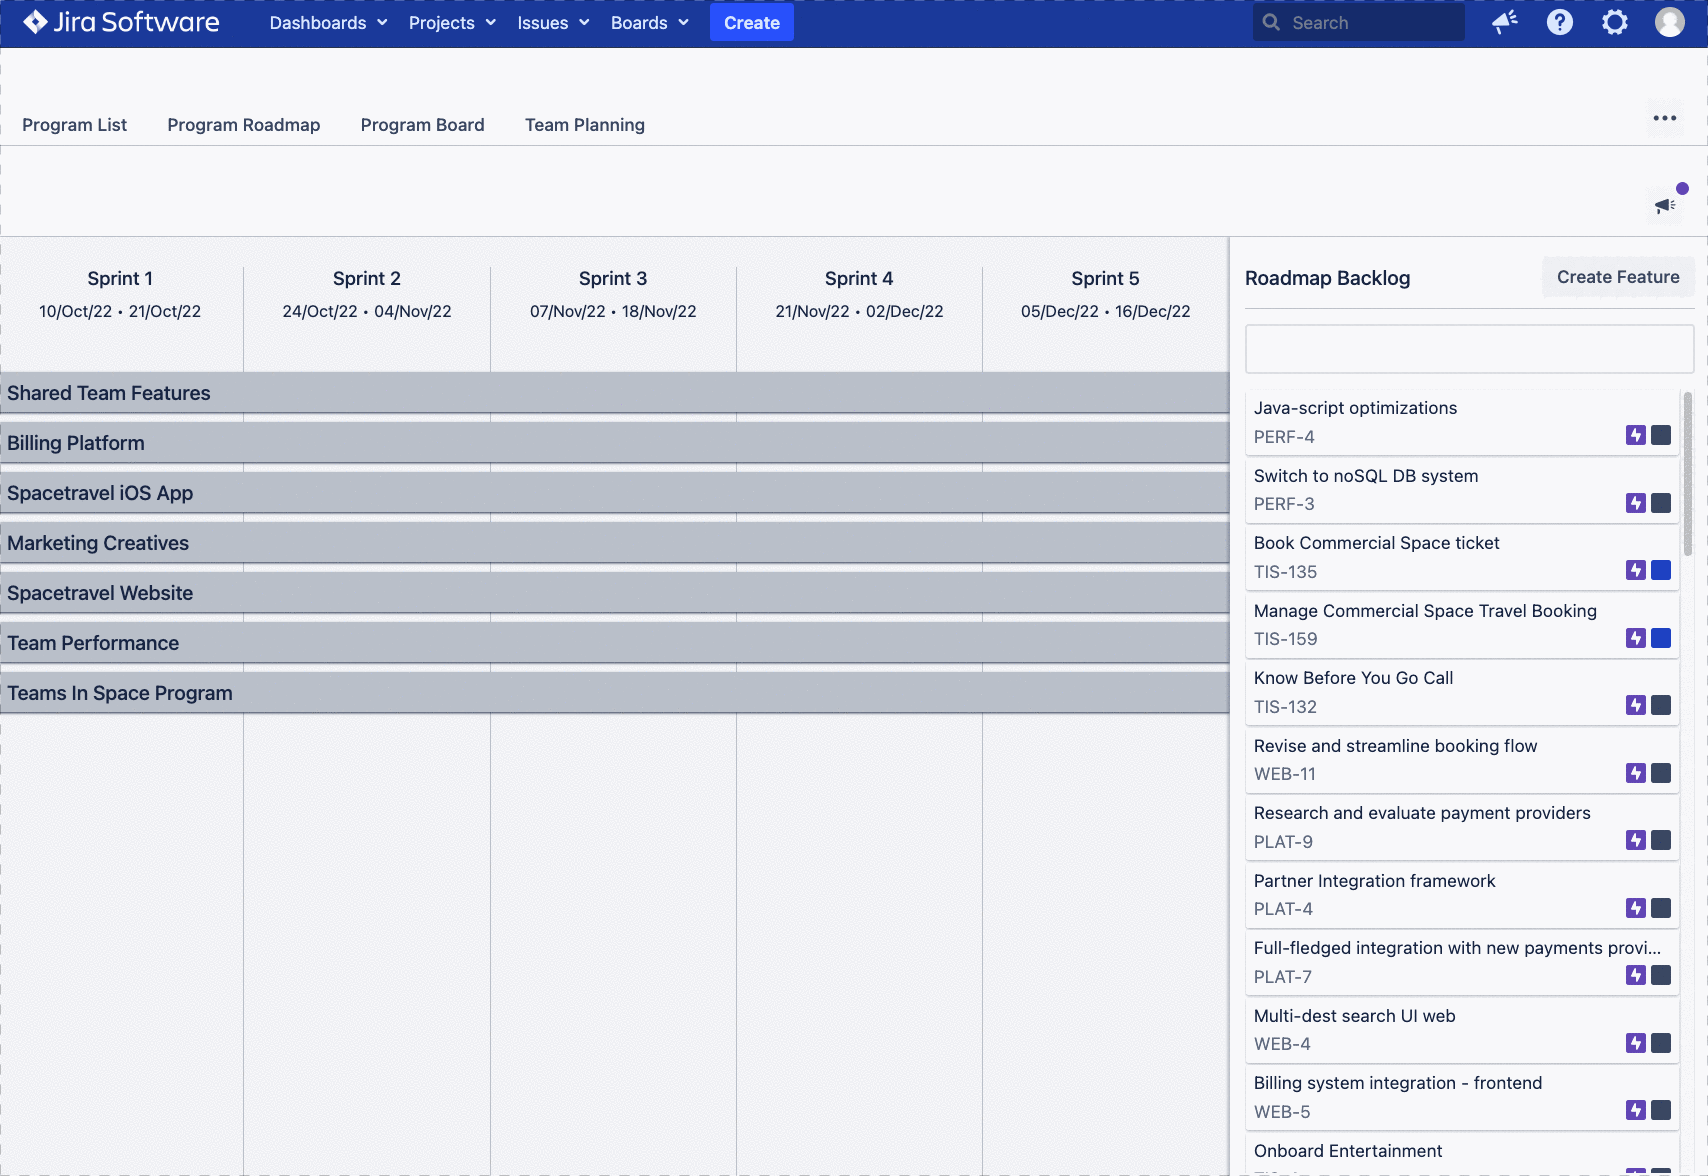 GIF showing how you can drag and drop features on the Program Roadmap